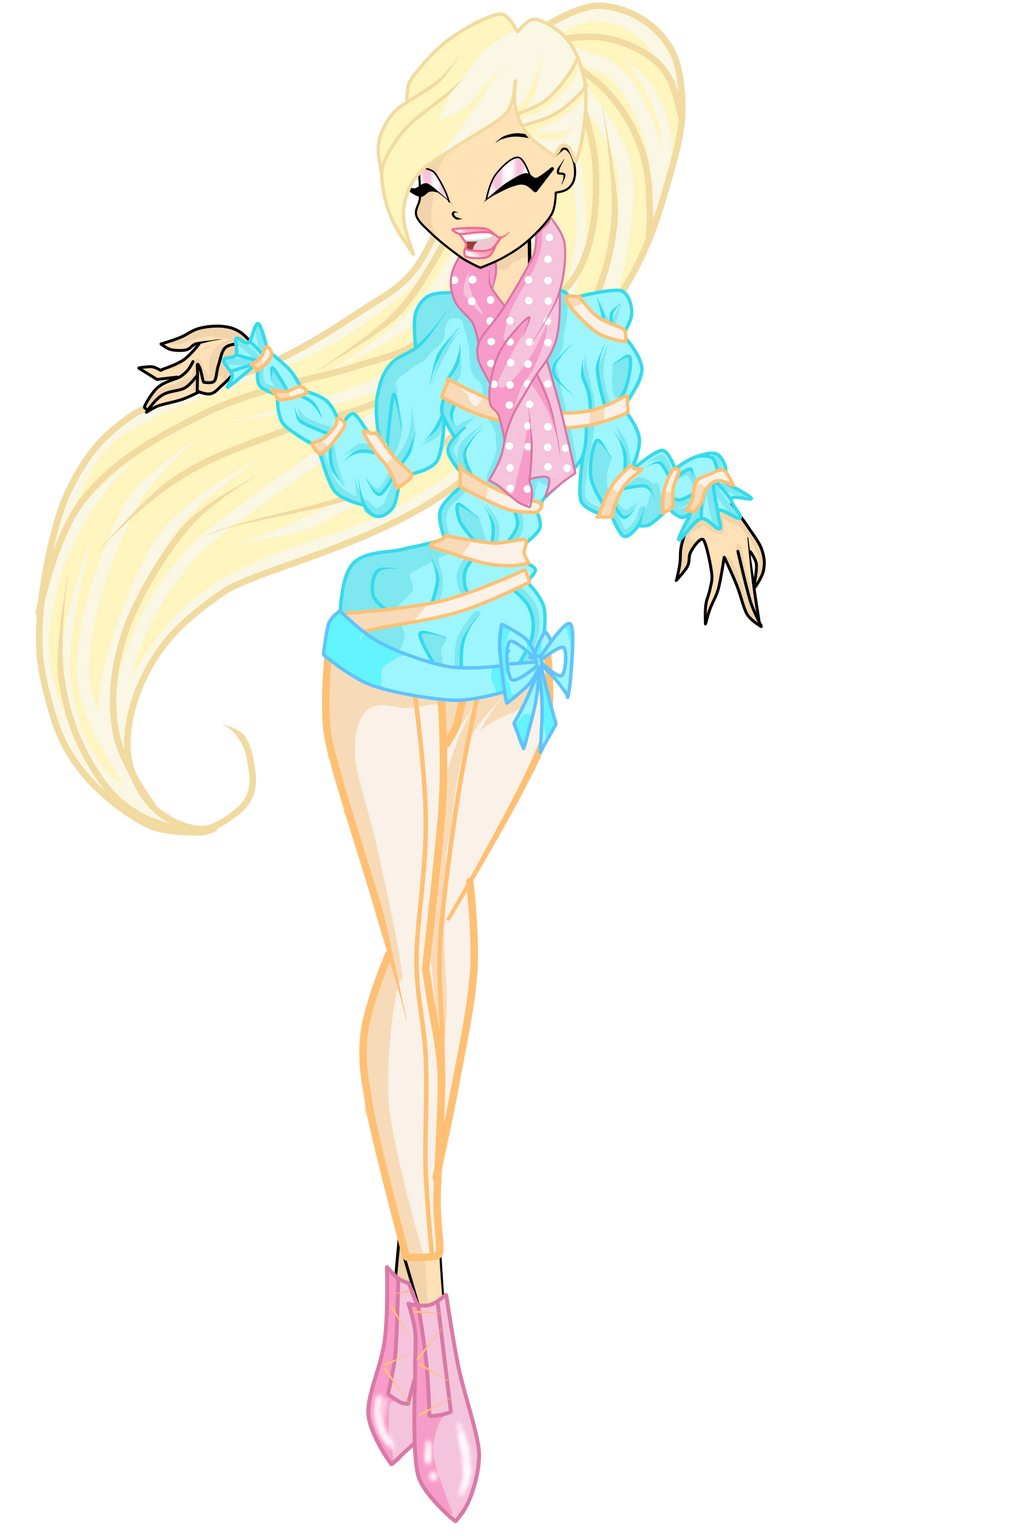 winx_com_starina_cafe_style_by_caboulla-d5tjxoh.png